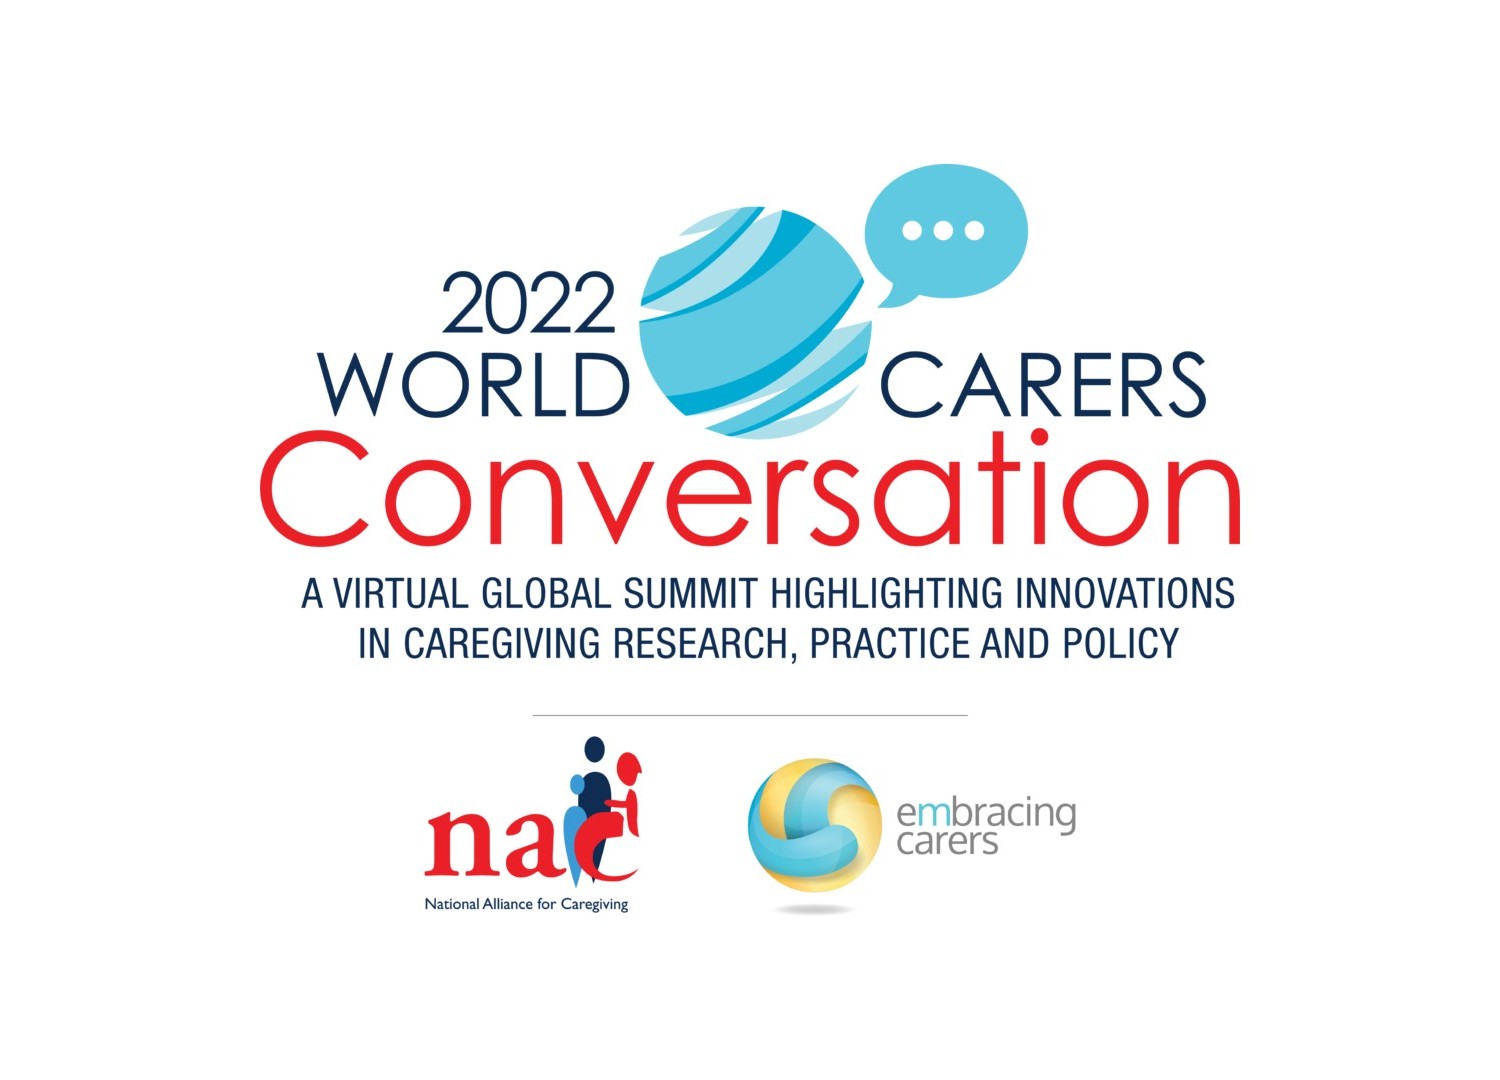 The World Carers Conversation 2022 Convened May 19, 2022